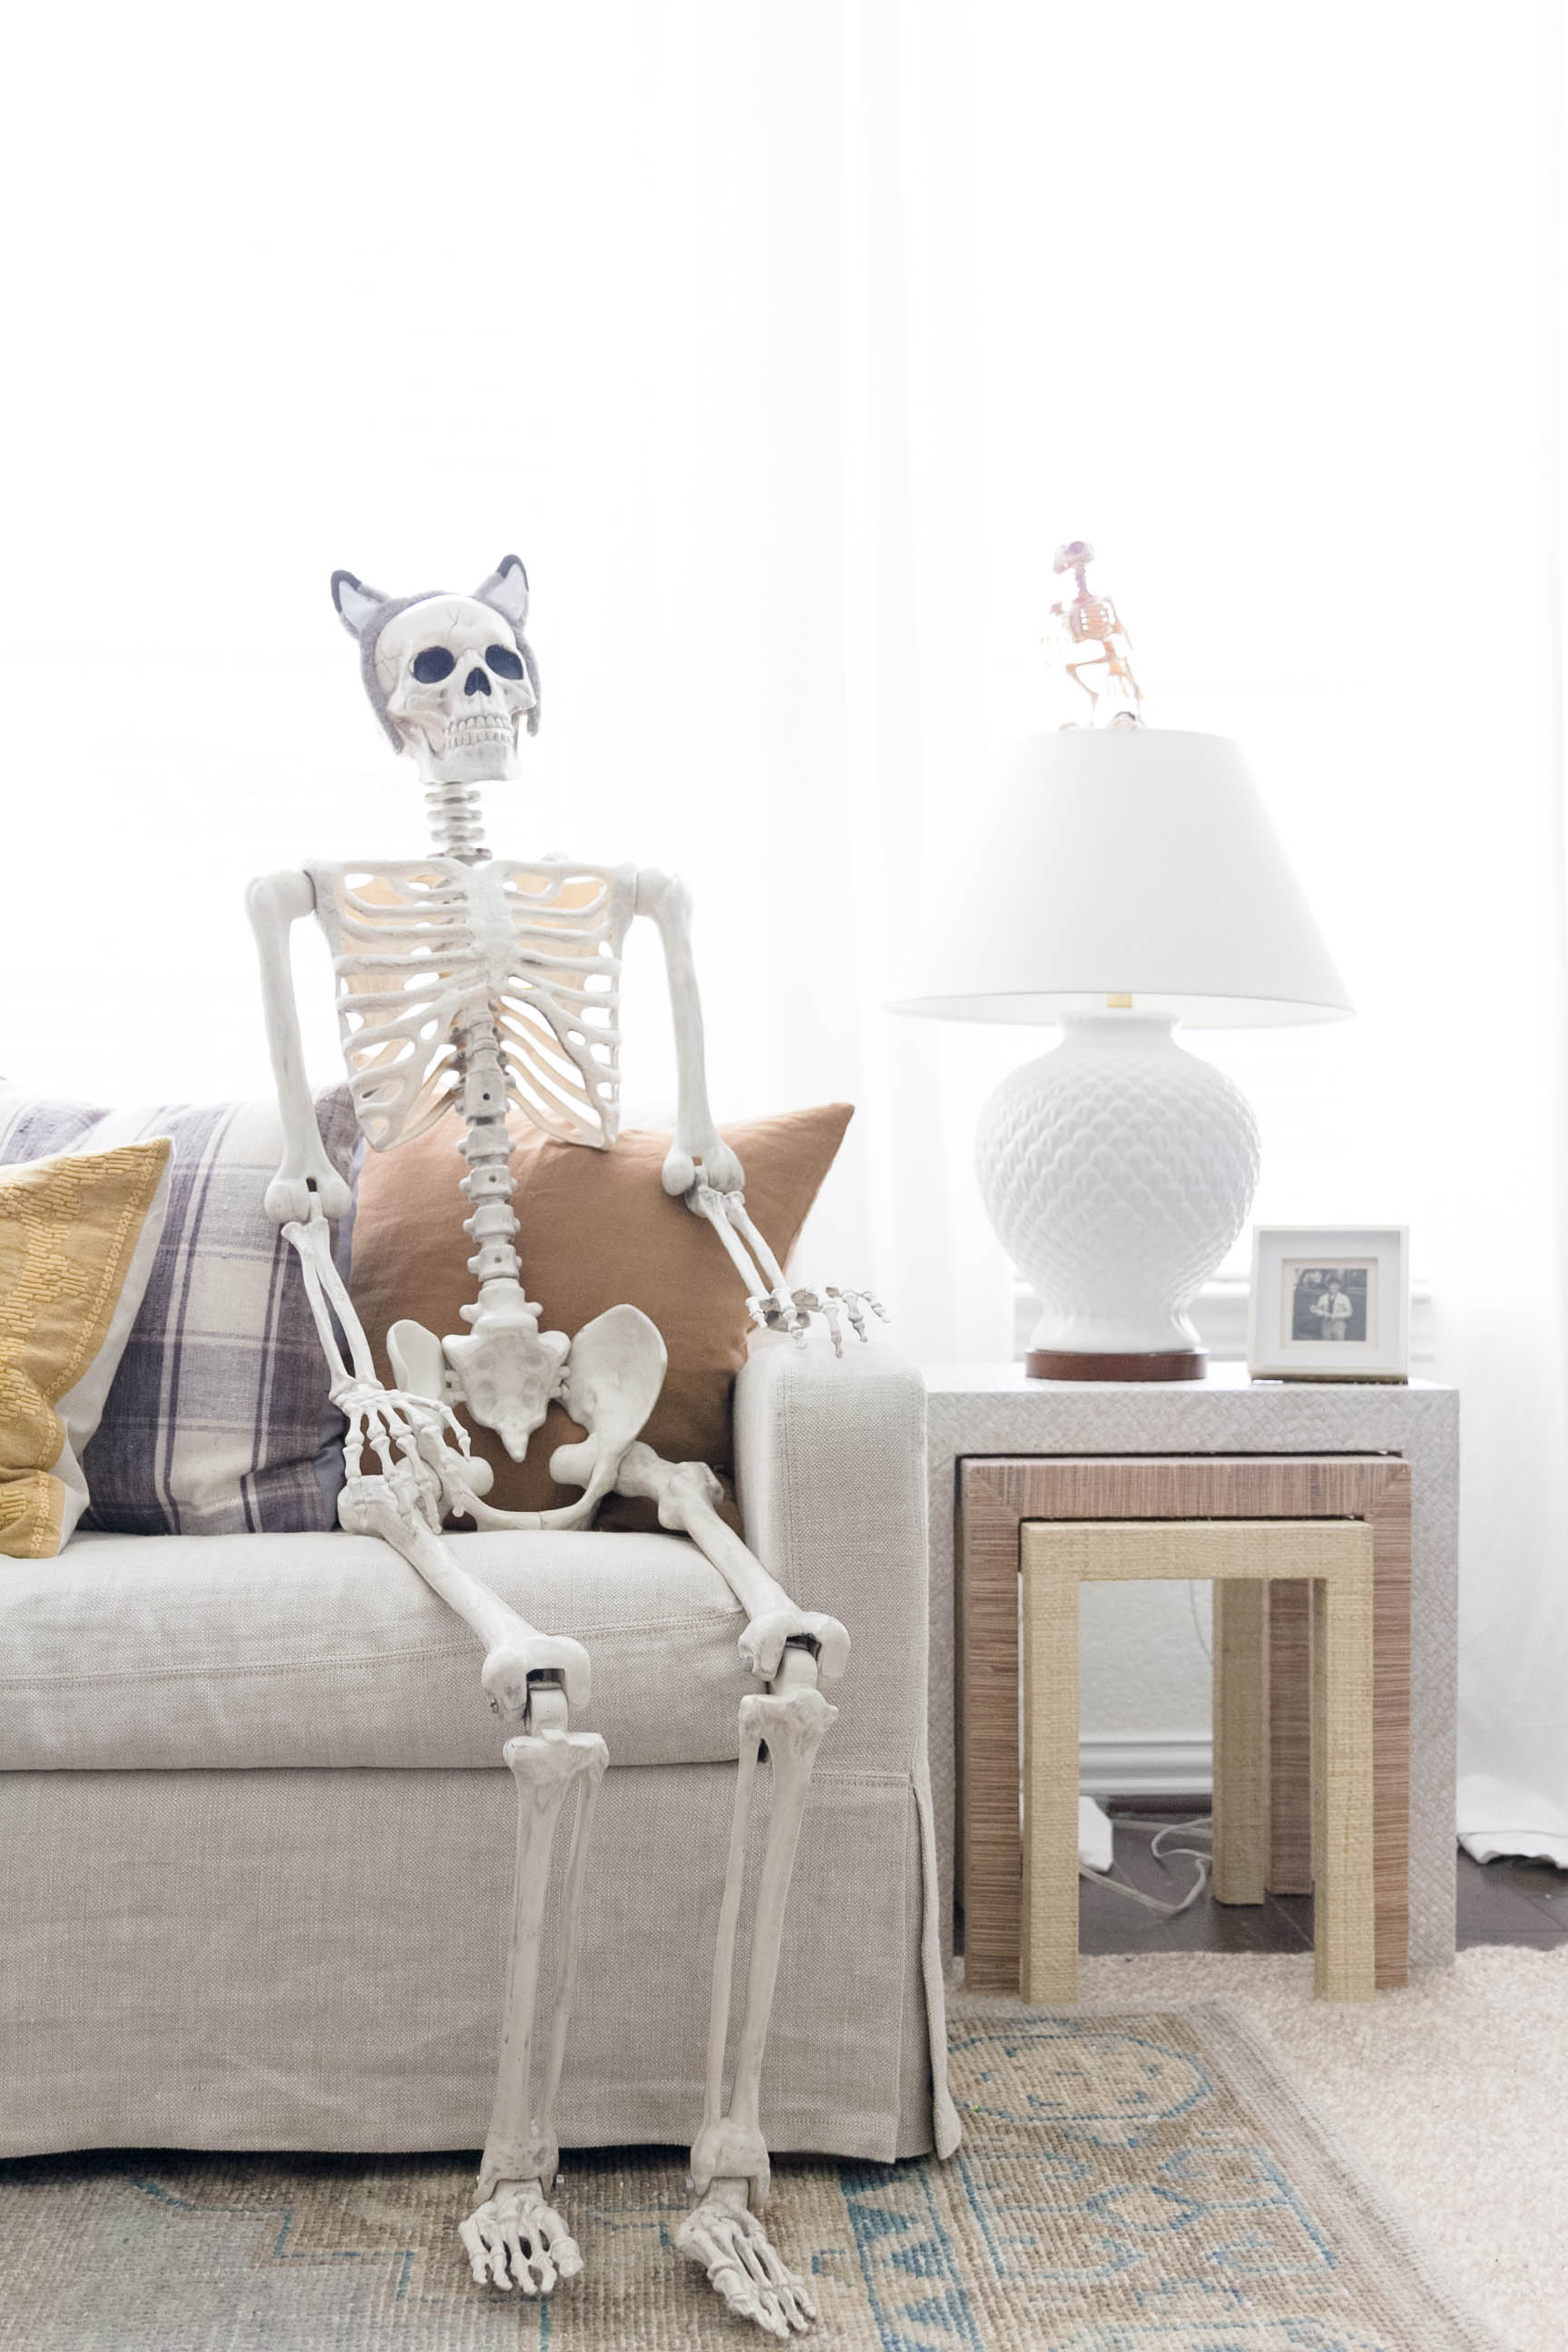 Simple Halloween Decorations for the Home-Life Sized Skelton wearing a Costume